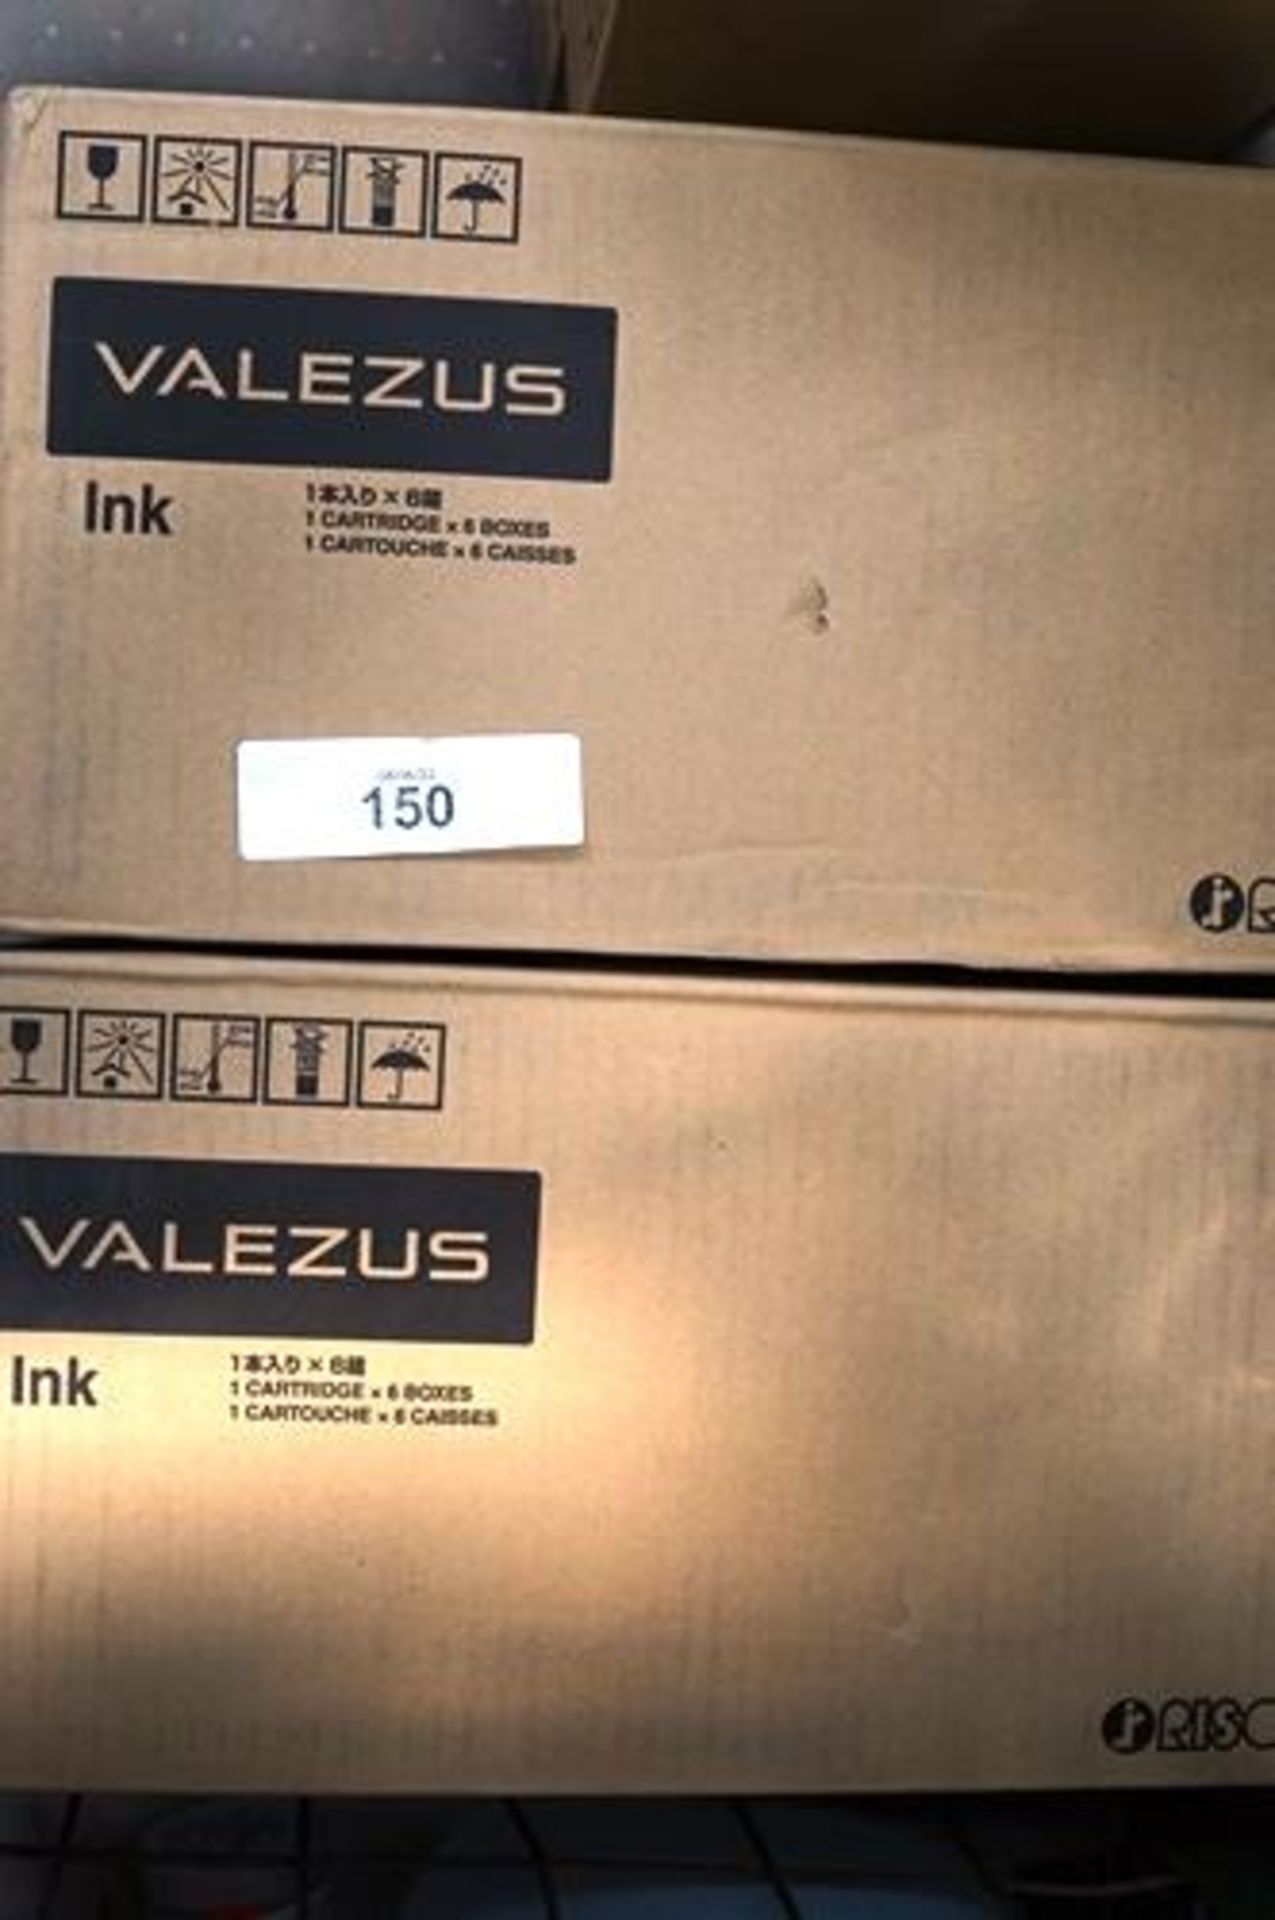 12 x Valezus 1000ml black ink cartridges, applicable model T2100 - New (Cabs3)